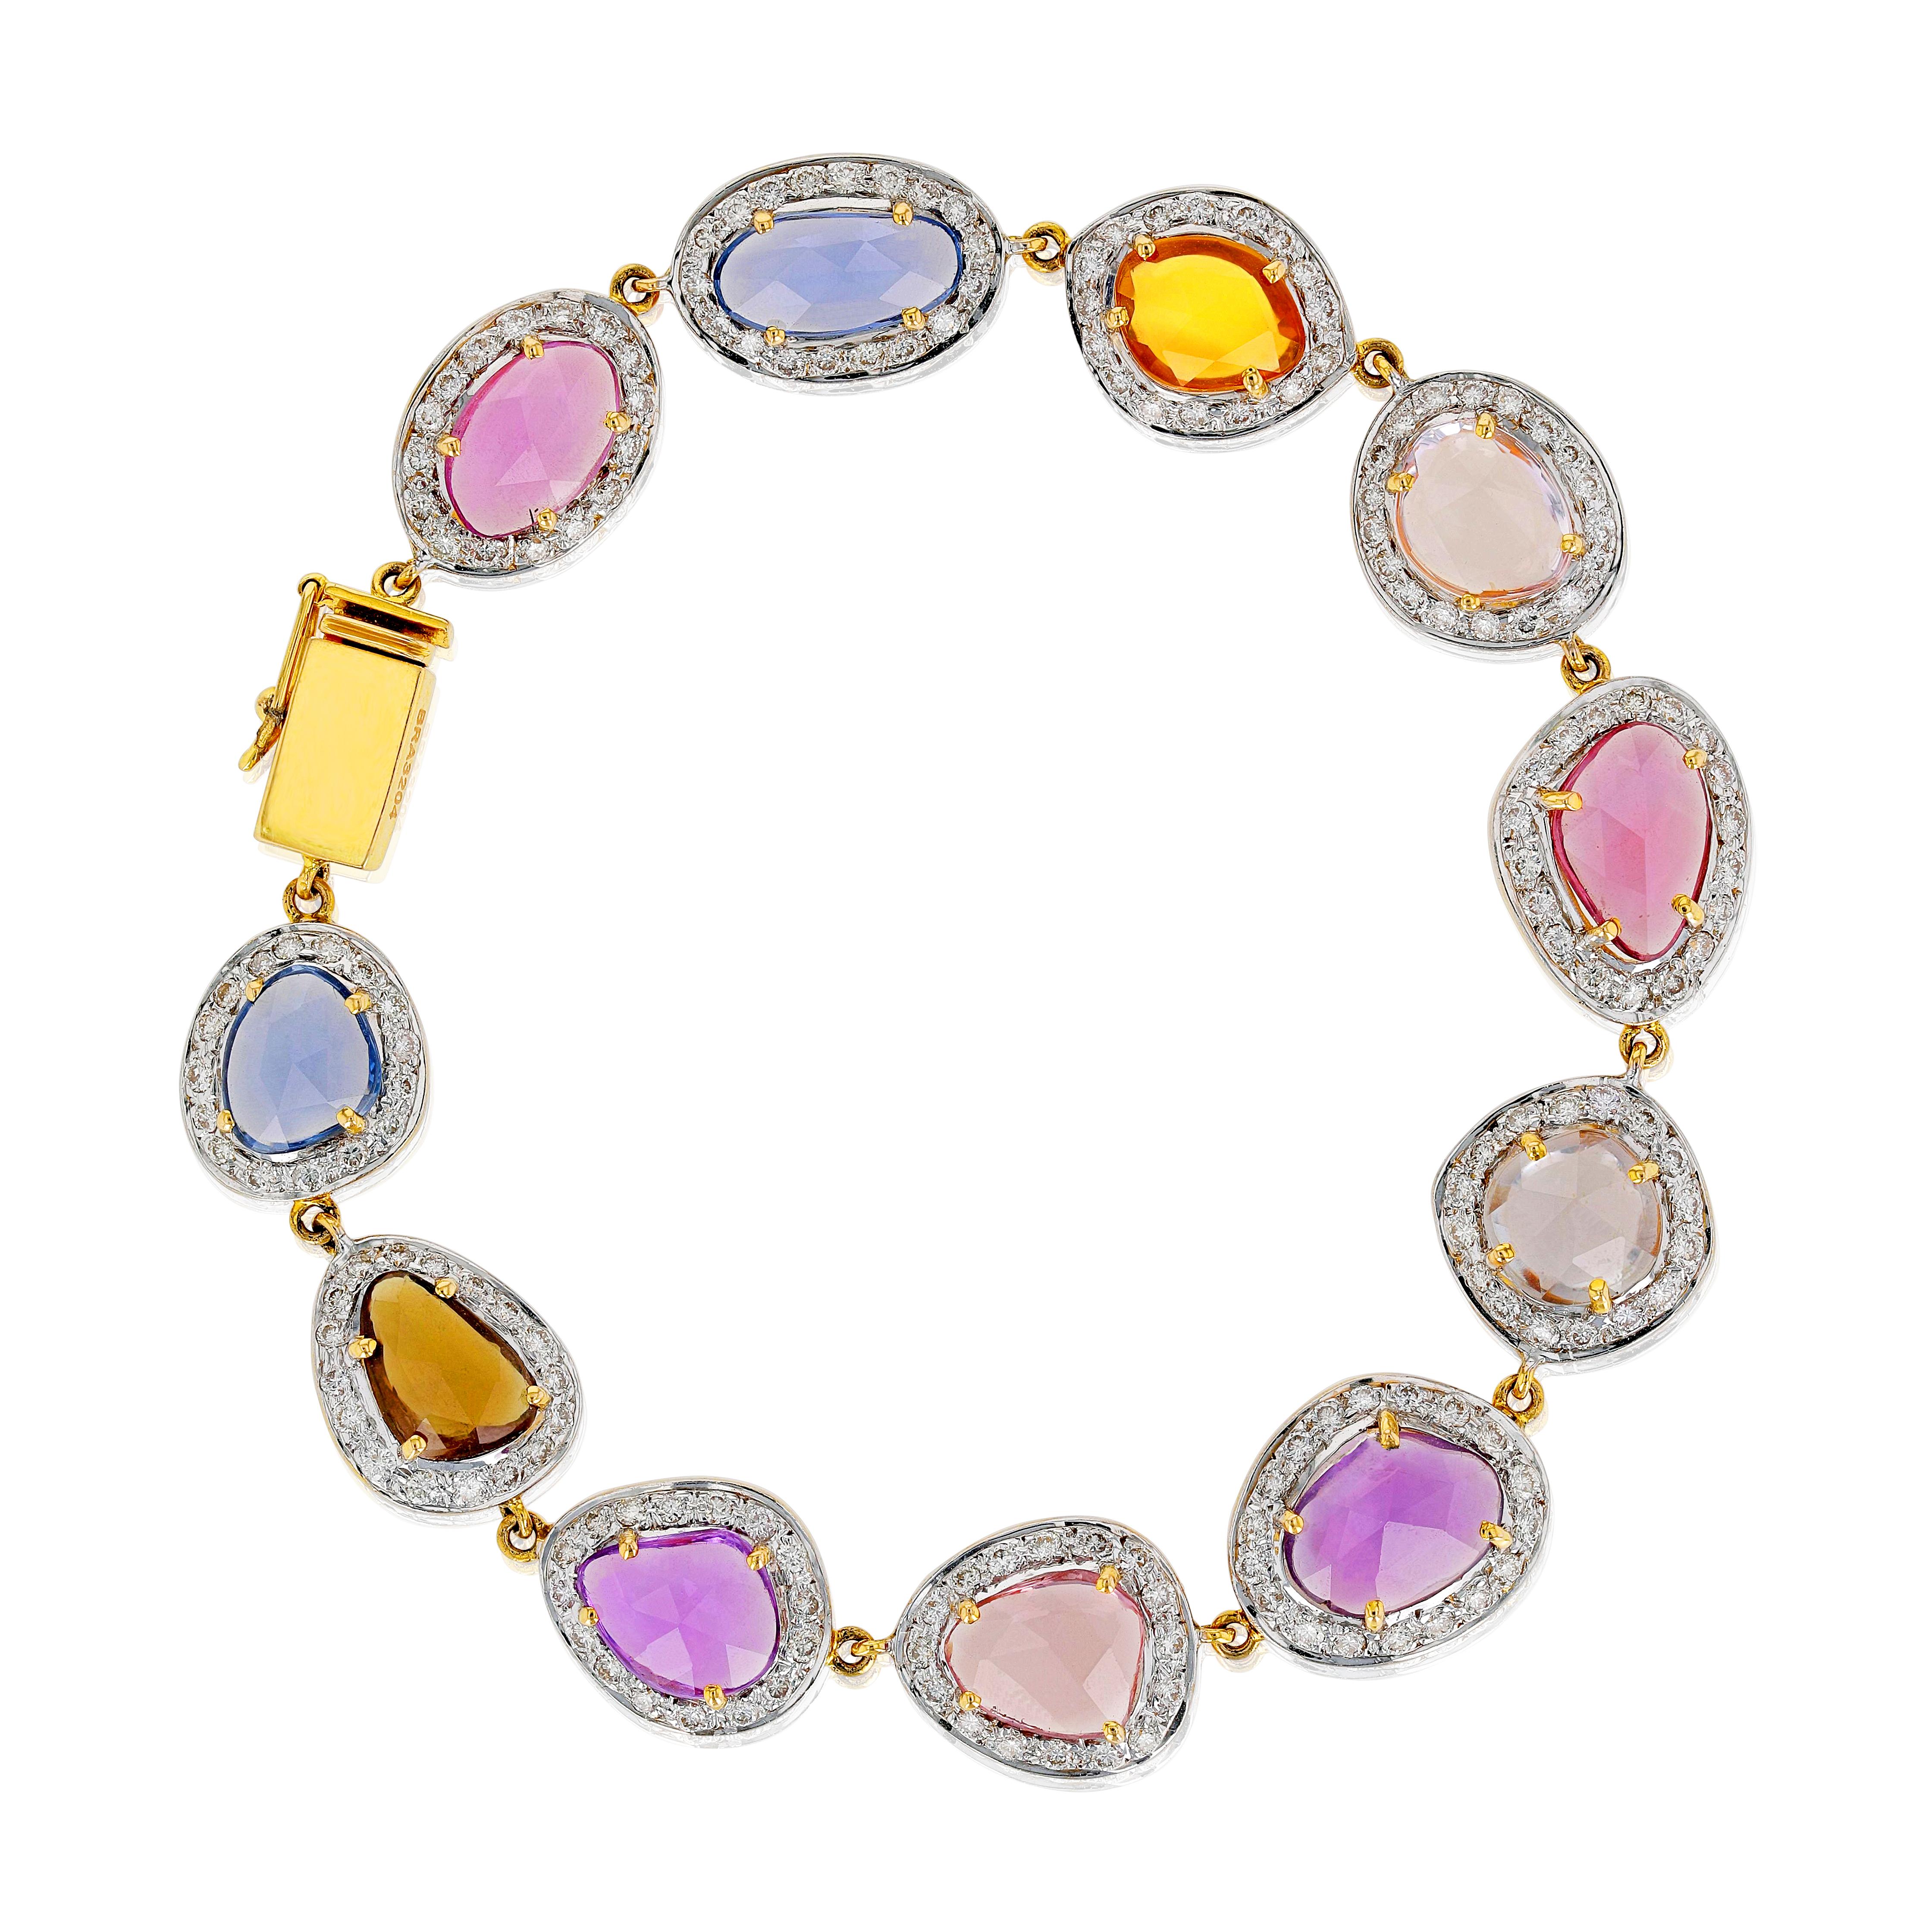 A timeless bracelet comprising multi-color sapphires, matched with small round cut white diamonds weighing 2.21 carats. The design of this white gold bracelet makes it a classic bracelet to treasure. Each sapphire is selected for its rich hue,